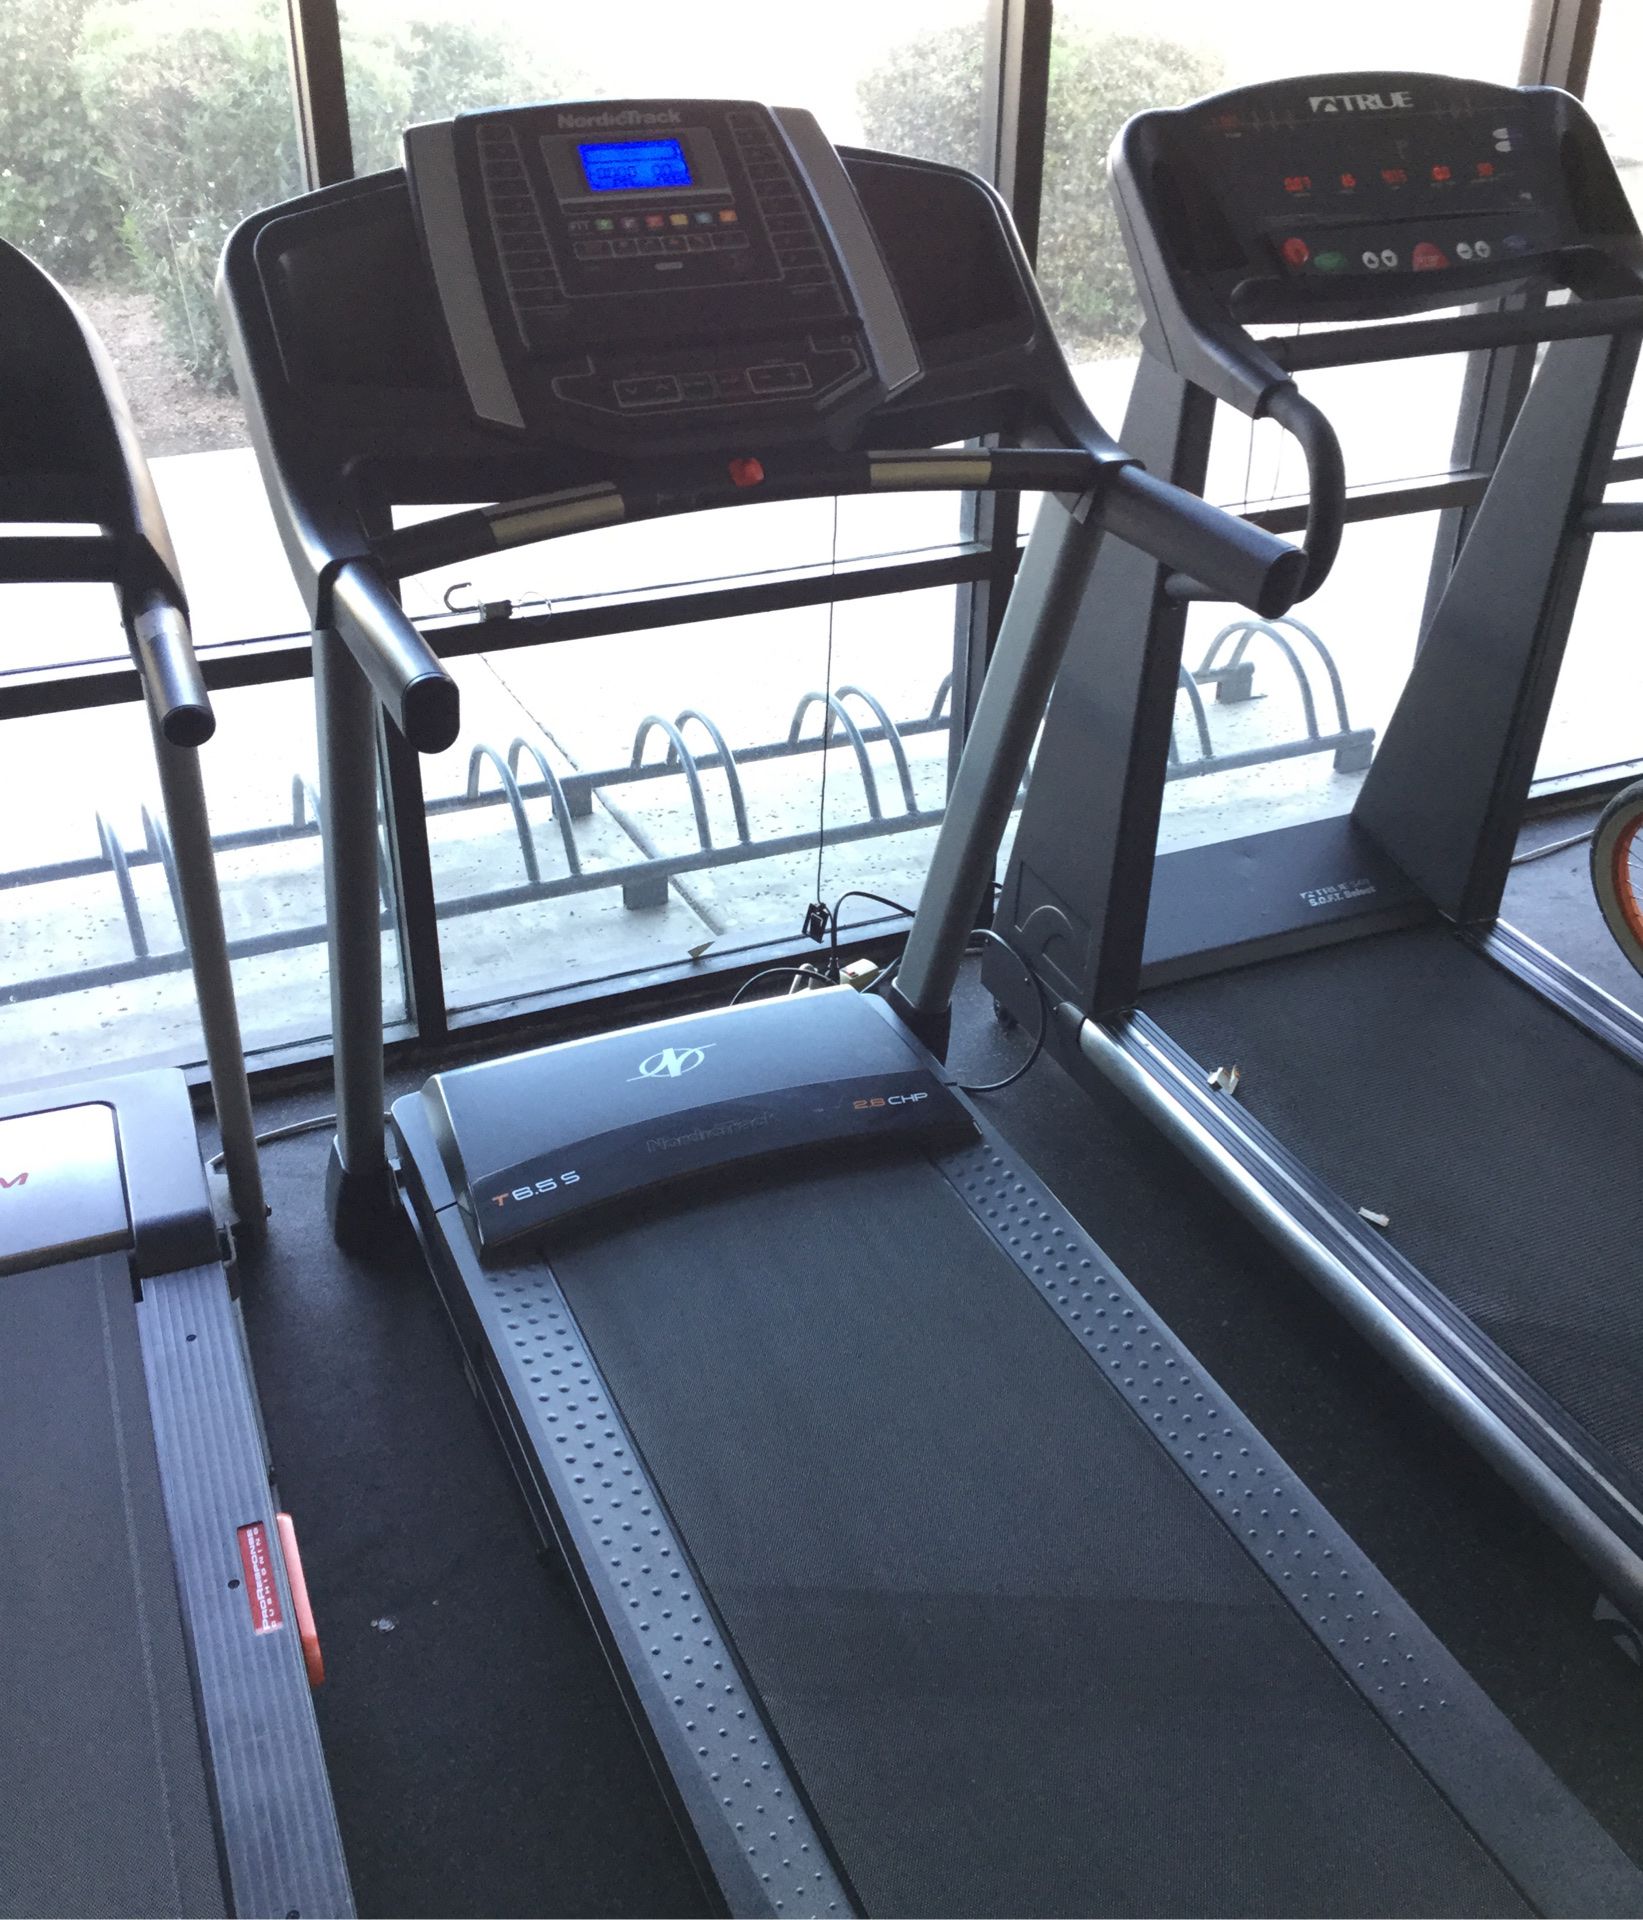 NordicTrack T6.5 S Folding treadmill with only 90 total miles on it